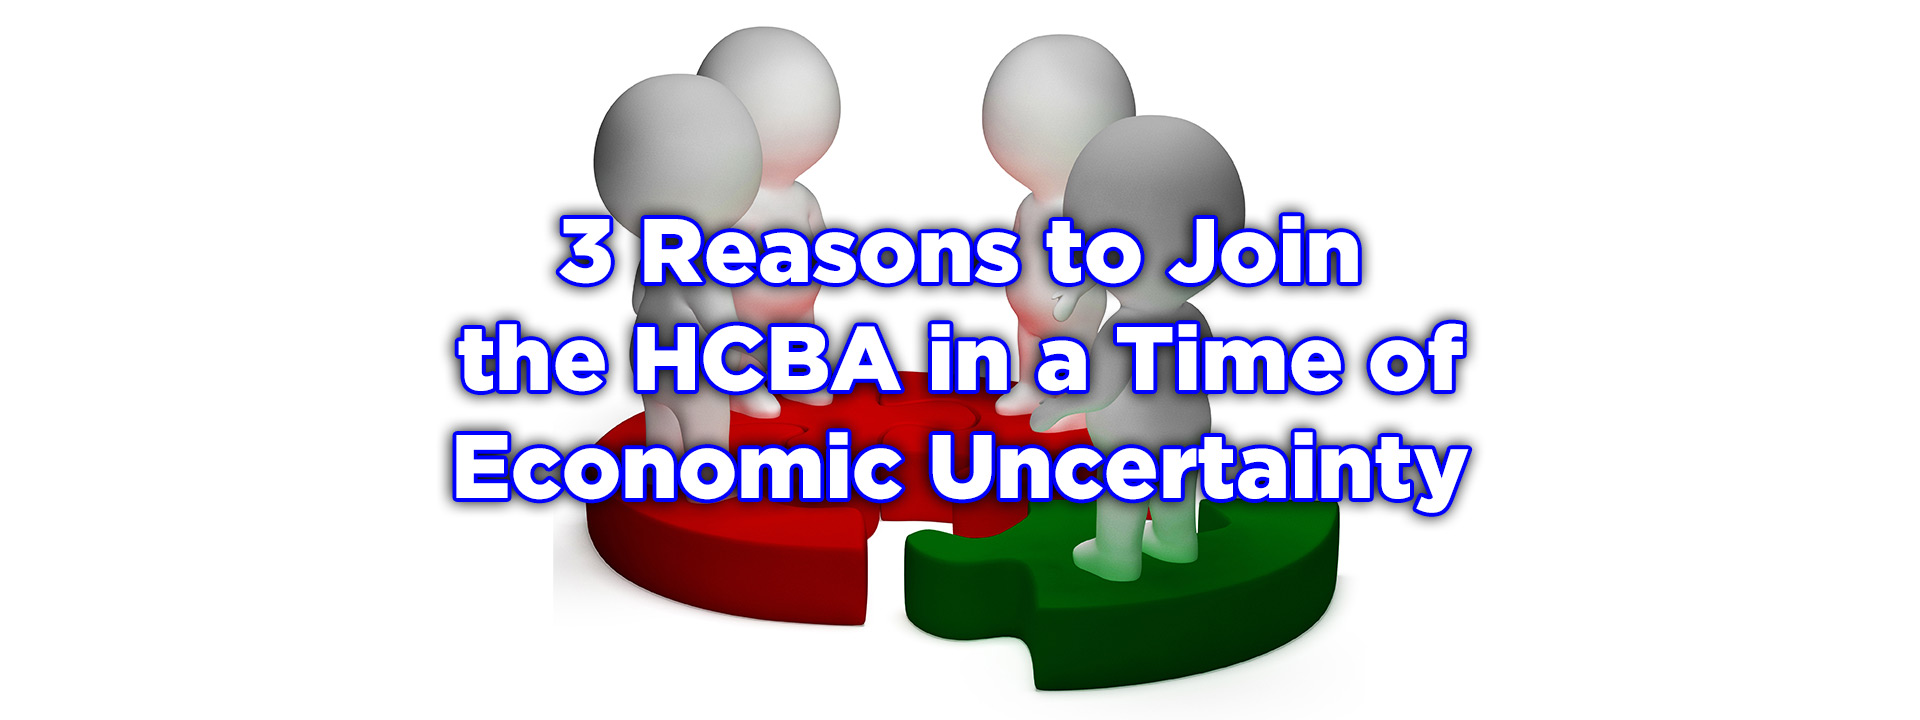 Photo: Three cartoon characters holding hands on top of a circular puzzle, reaching out to a fourth to finish the puzzle. Text: 3 reasons to Join the HCBA in a Time of Economic Uncertainty